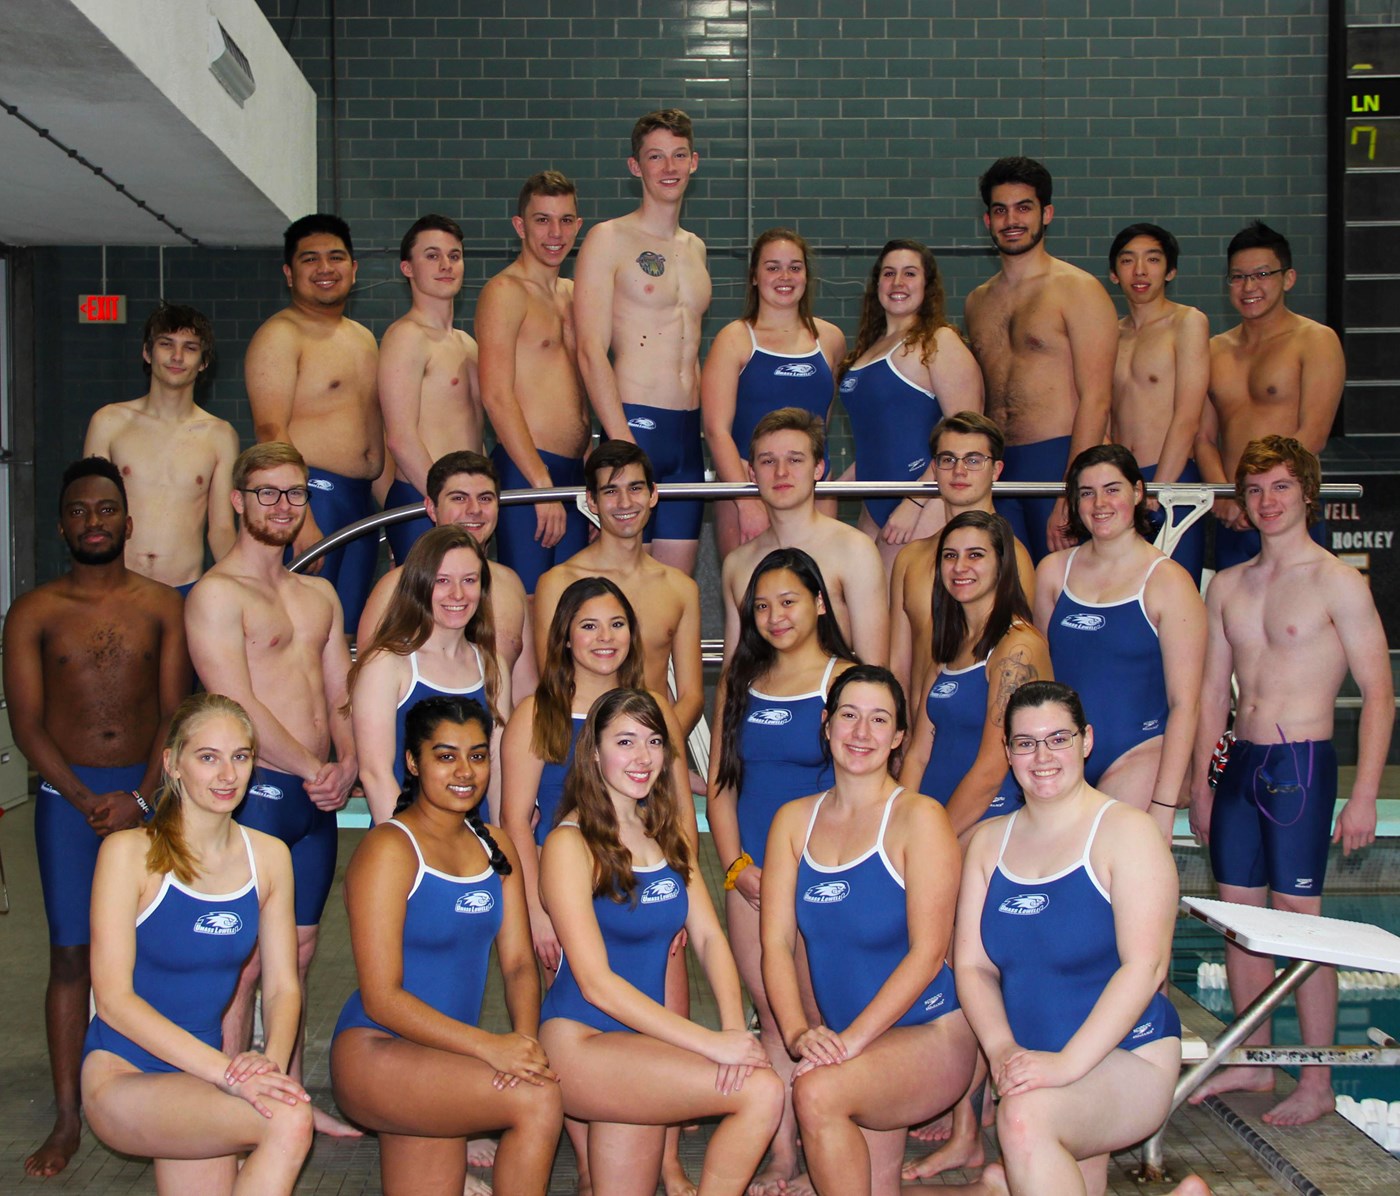 Swim and Dive team pose as a group prior to their meet